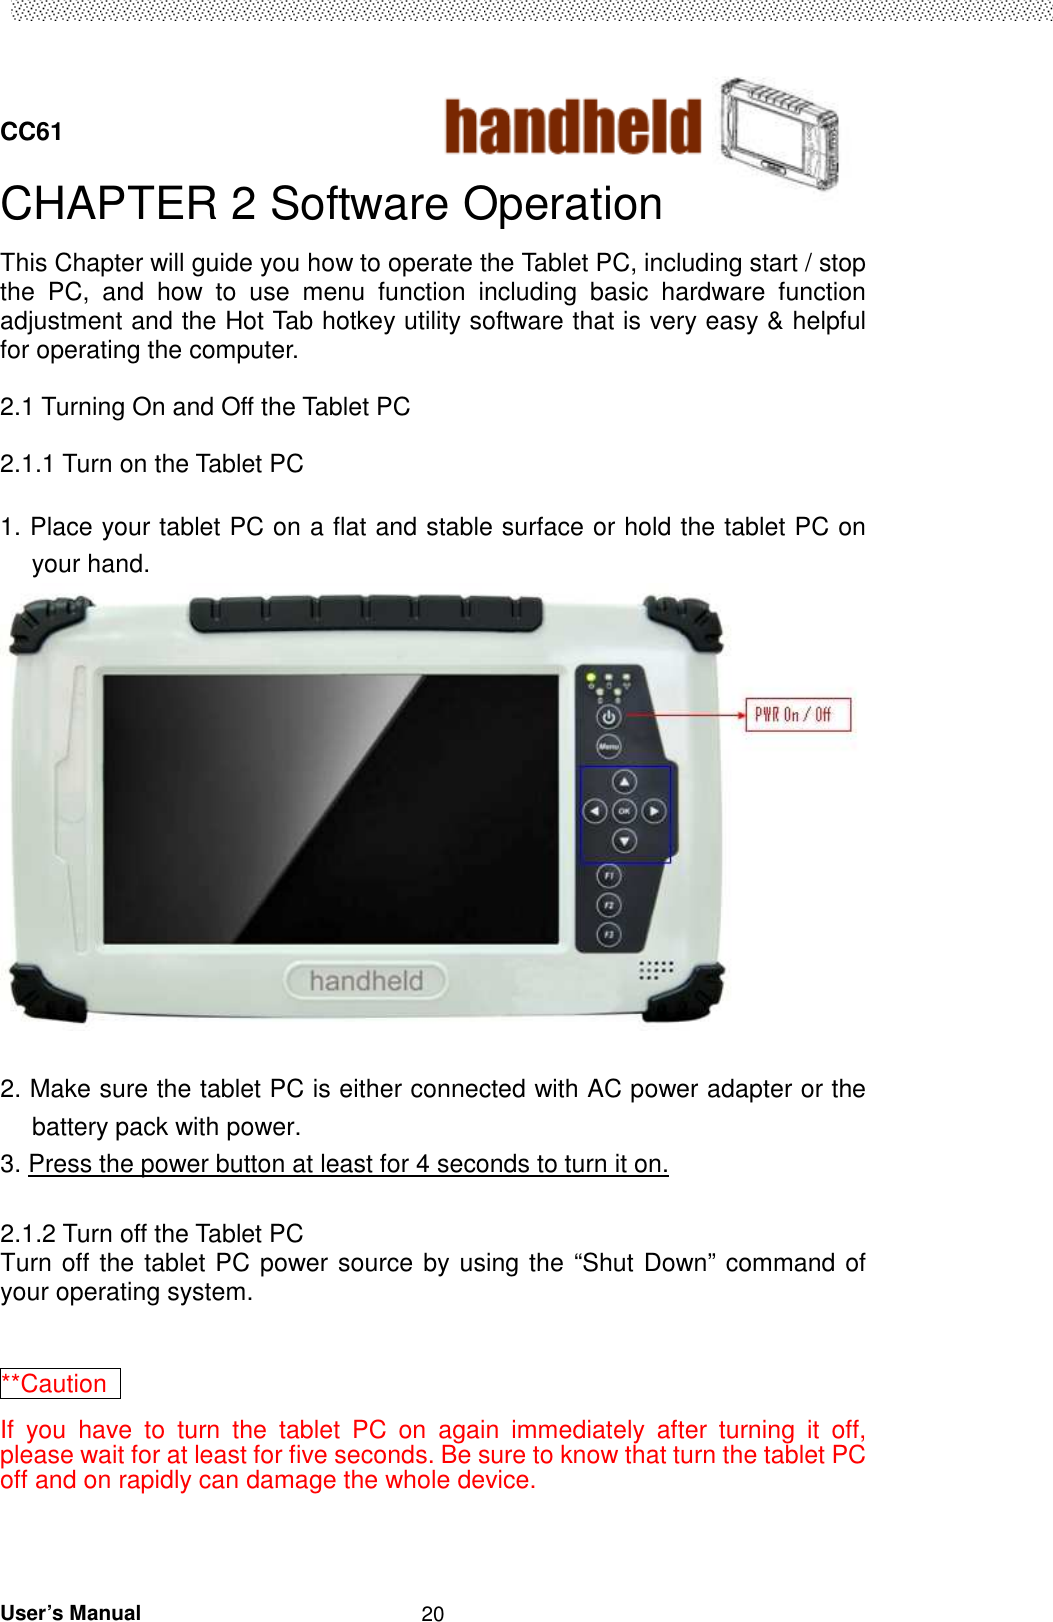  CC61                                       User’s Manual                                                   20CHAPTER 2 Software Operation This Chapter will guide you how to operate the Tablet PC, including start / stop the  PC,  and  how  to  use  menu  function  including  basic  hardware  function adjustment and the Hot Tab hotkey utility software that is very easy &amp; helpful for operating the computer.  2.1 Turning On and Off the Tablet PC  2.1.1 Turn on the Tablet PC  1. Place your tablet PC on a flat and stable surface or hold the tablet PC on your hand.   2. Make sure the tablet PC is either connected with AC power adapter or the battery pack with power. 3. Press the power button at least for 4 seconds to turn it on.  2.1.2 Turn off the Tablet PC Turn off the tablet PC power source by using the “Shut Down” command of your operating system.  **Caution   If  you  have  to  turn  the  tablet  PC  on  again  immediately  after  turning  it  off, please wait for at least for five seconds. Be sure to know that turn the tablet PC off and on rapidly can damage the whole device.  